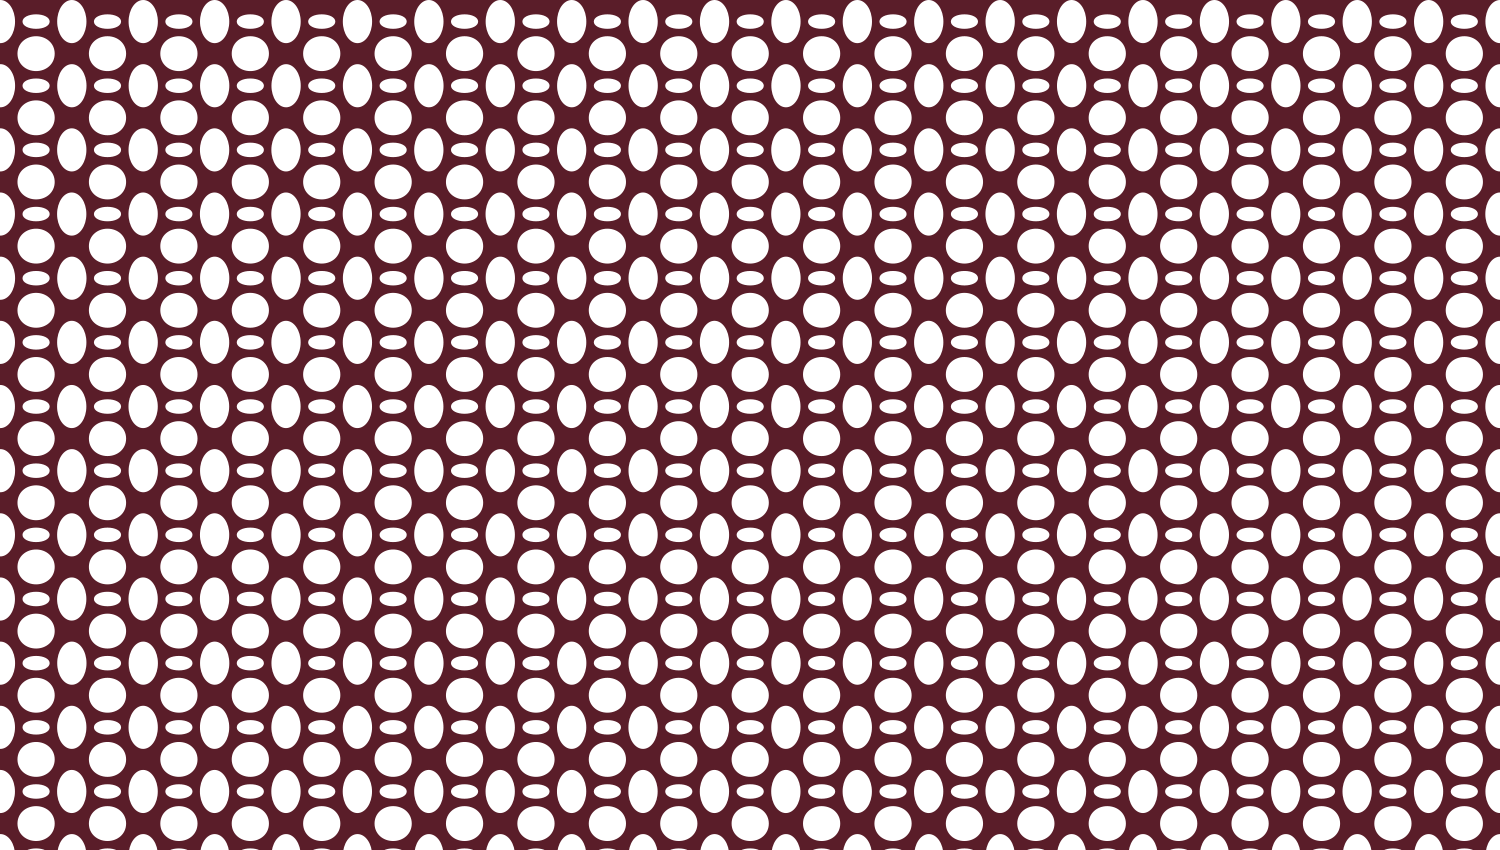 Parasoleil™ Rubicon© pattern displayed with a burgundy color overlay